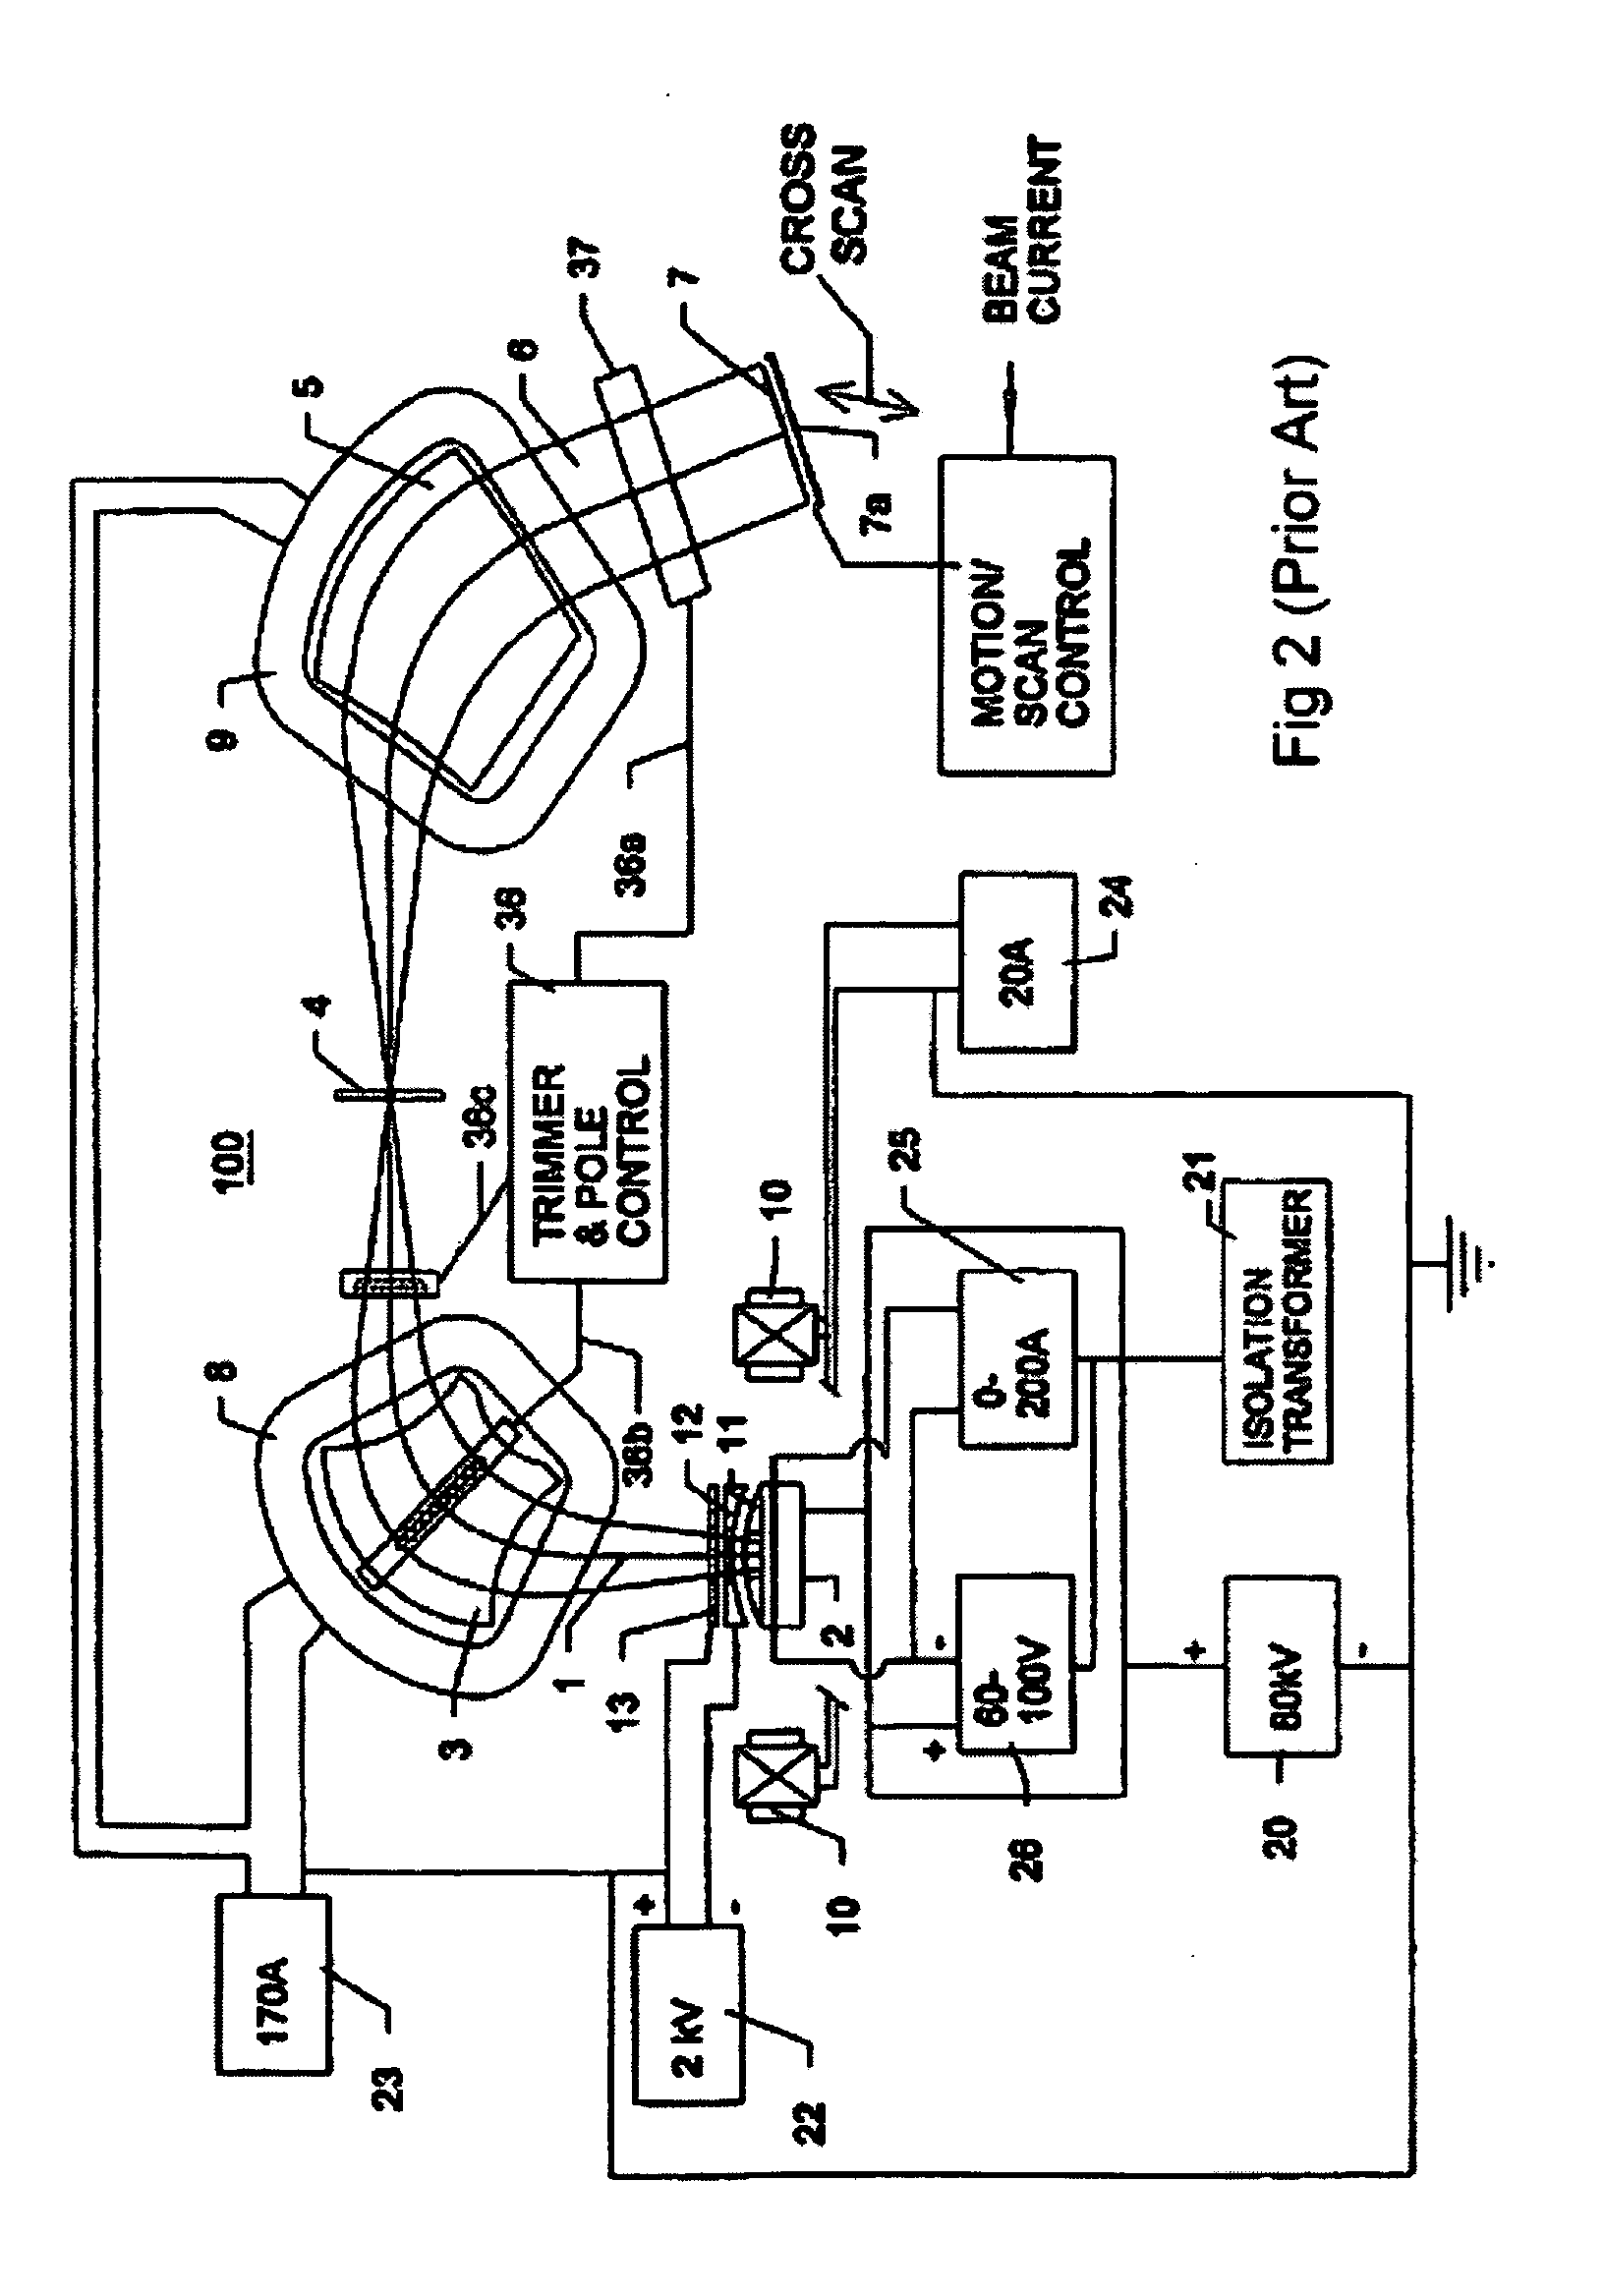 High mass resolution low aberration analyzer magnet for ribbon beams and the system for ribbon beam ion implanter